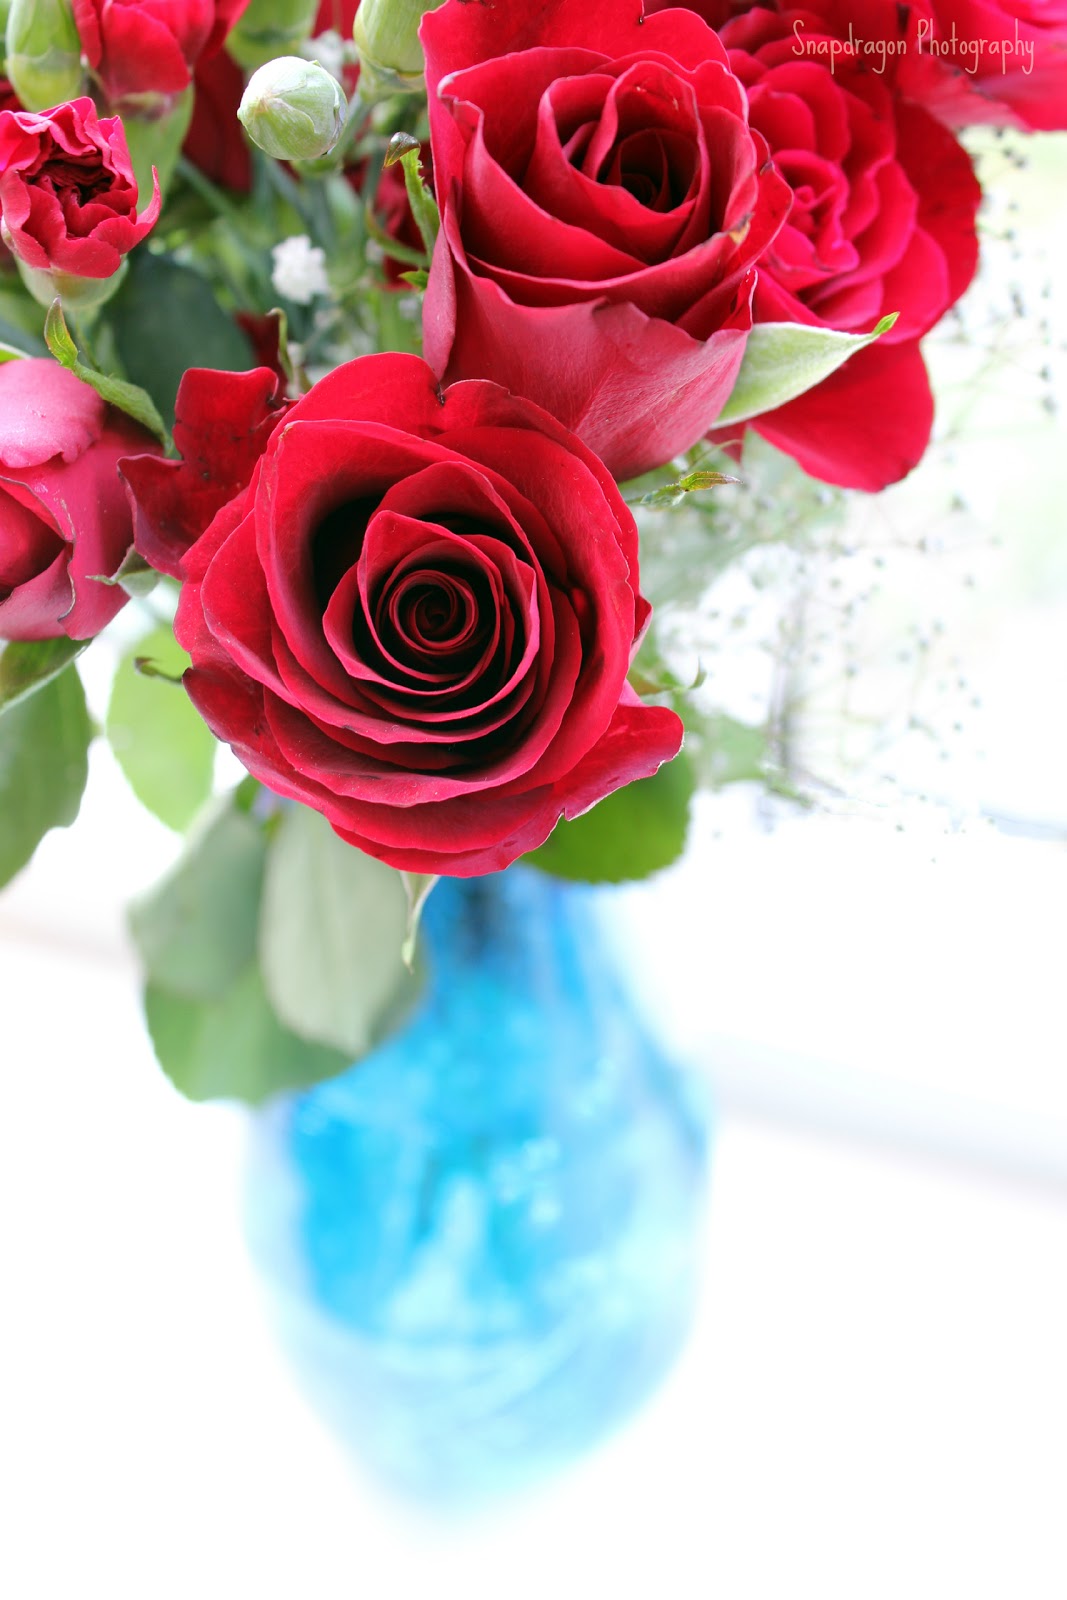 Most Beautiful Red Rose Flowers The Pictures